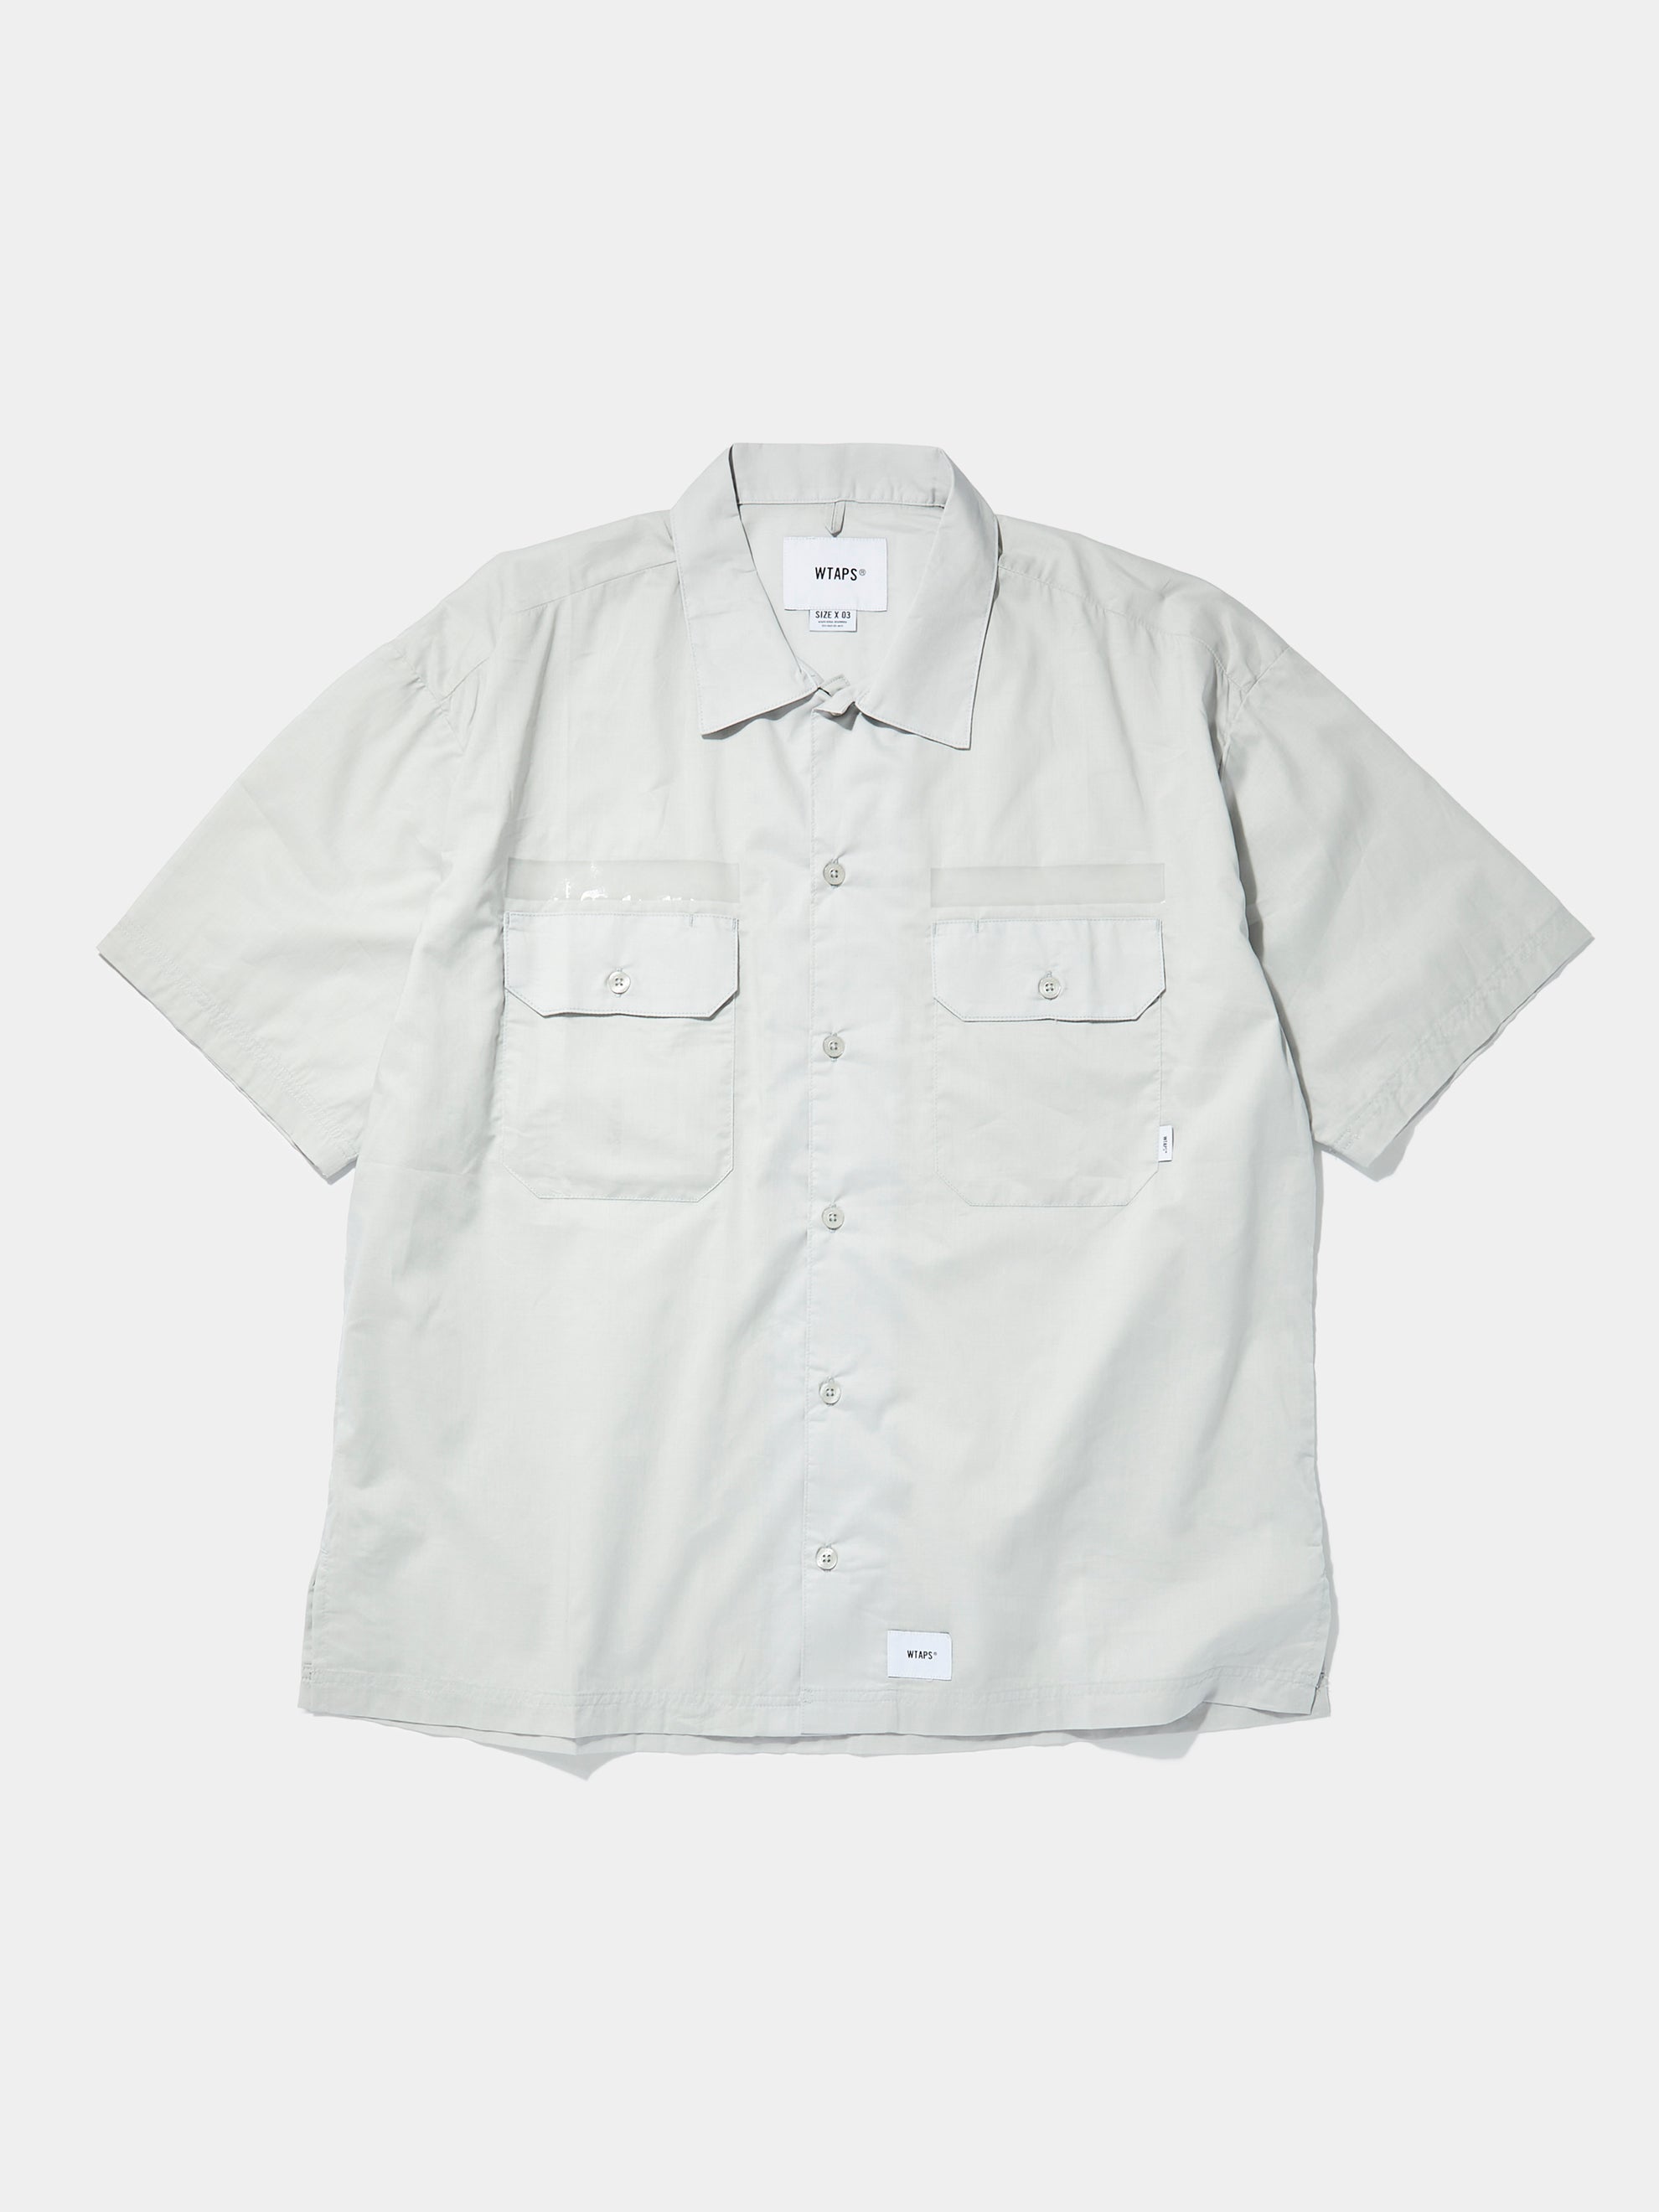 Buy Wtaps SHIRTS 03 Online at UNION LOS ANGELES